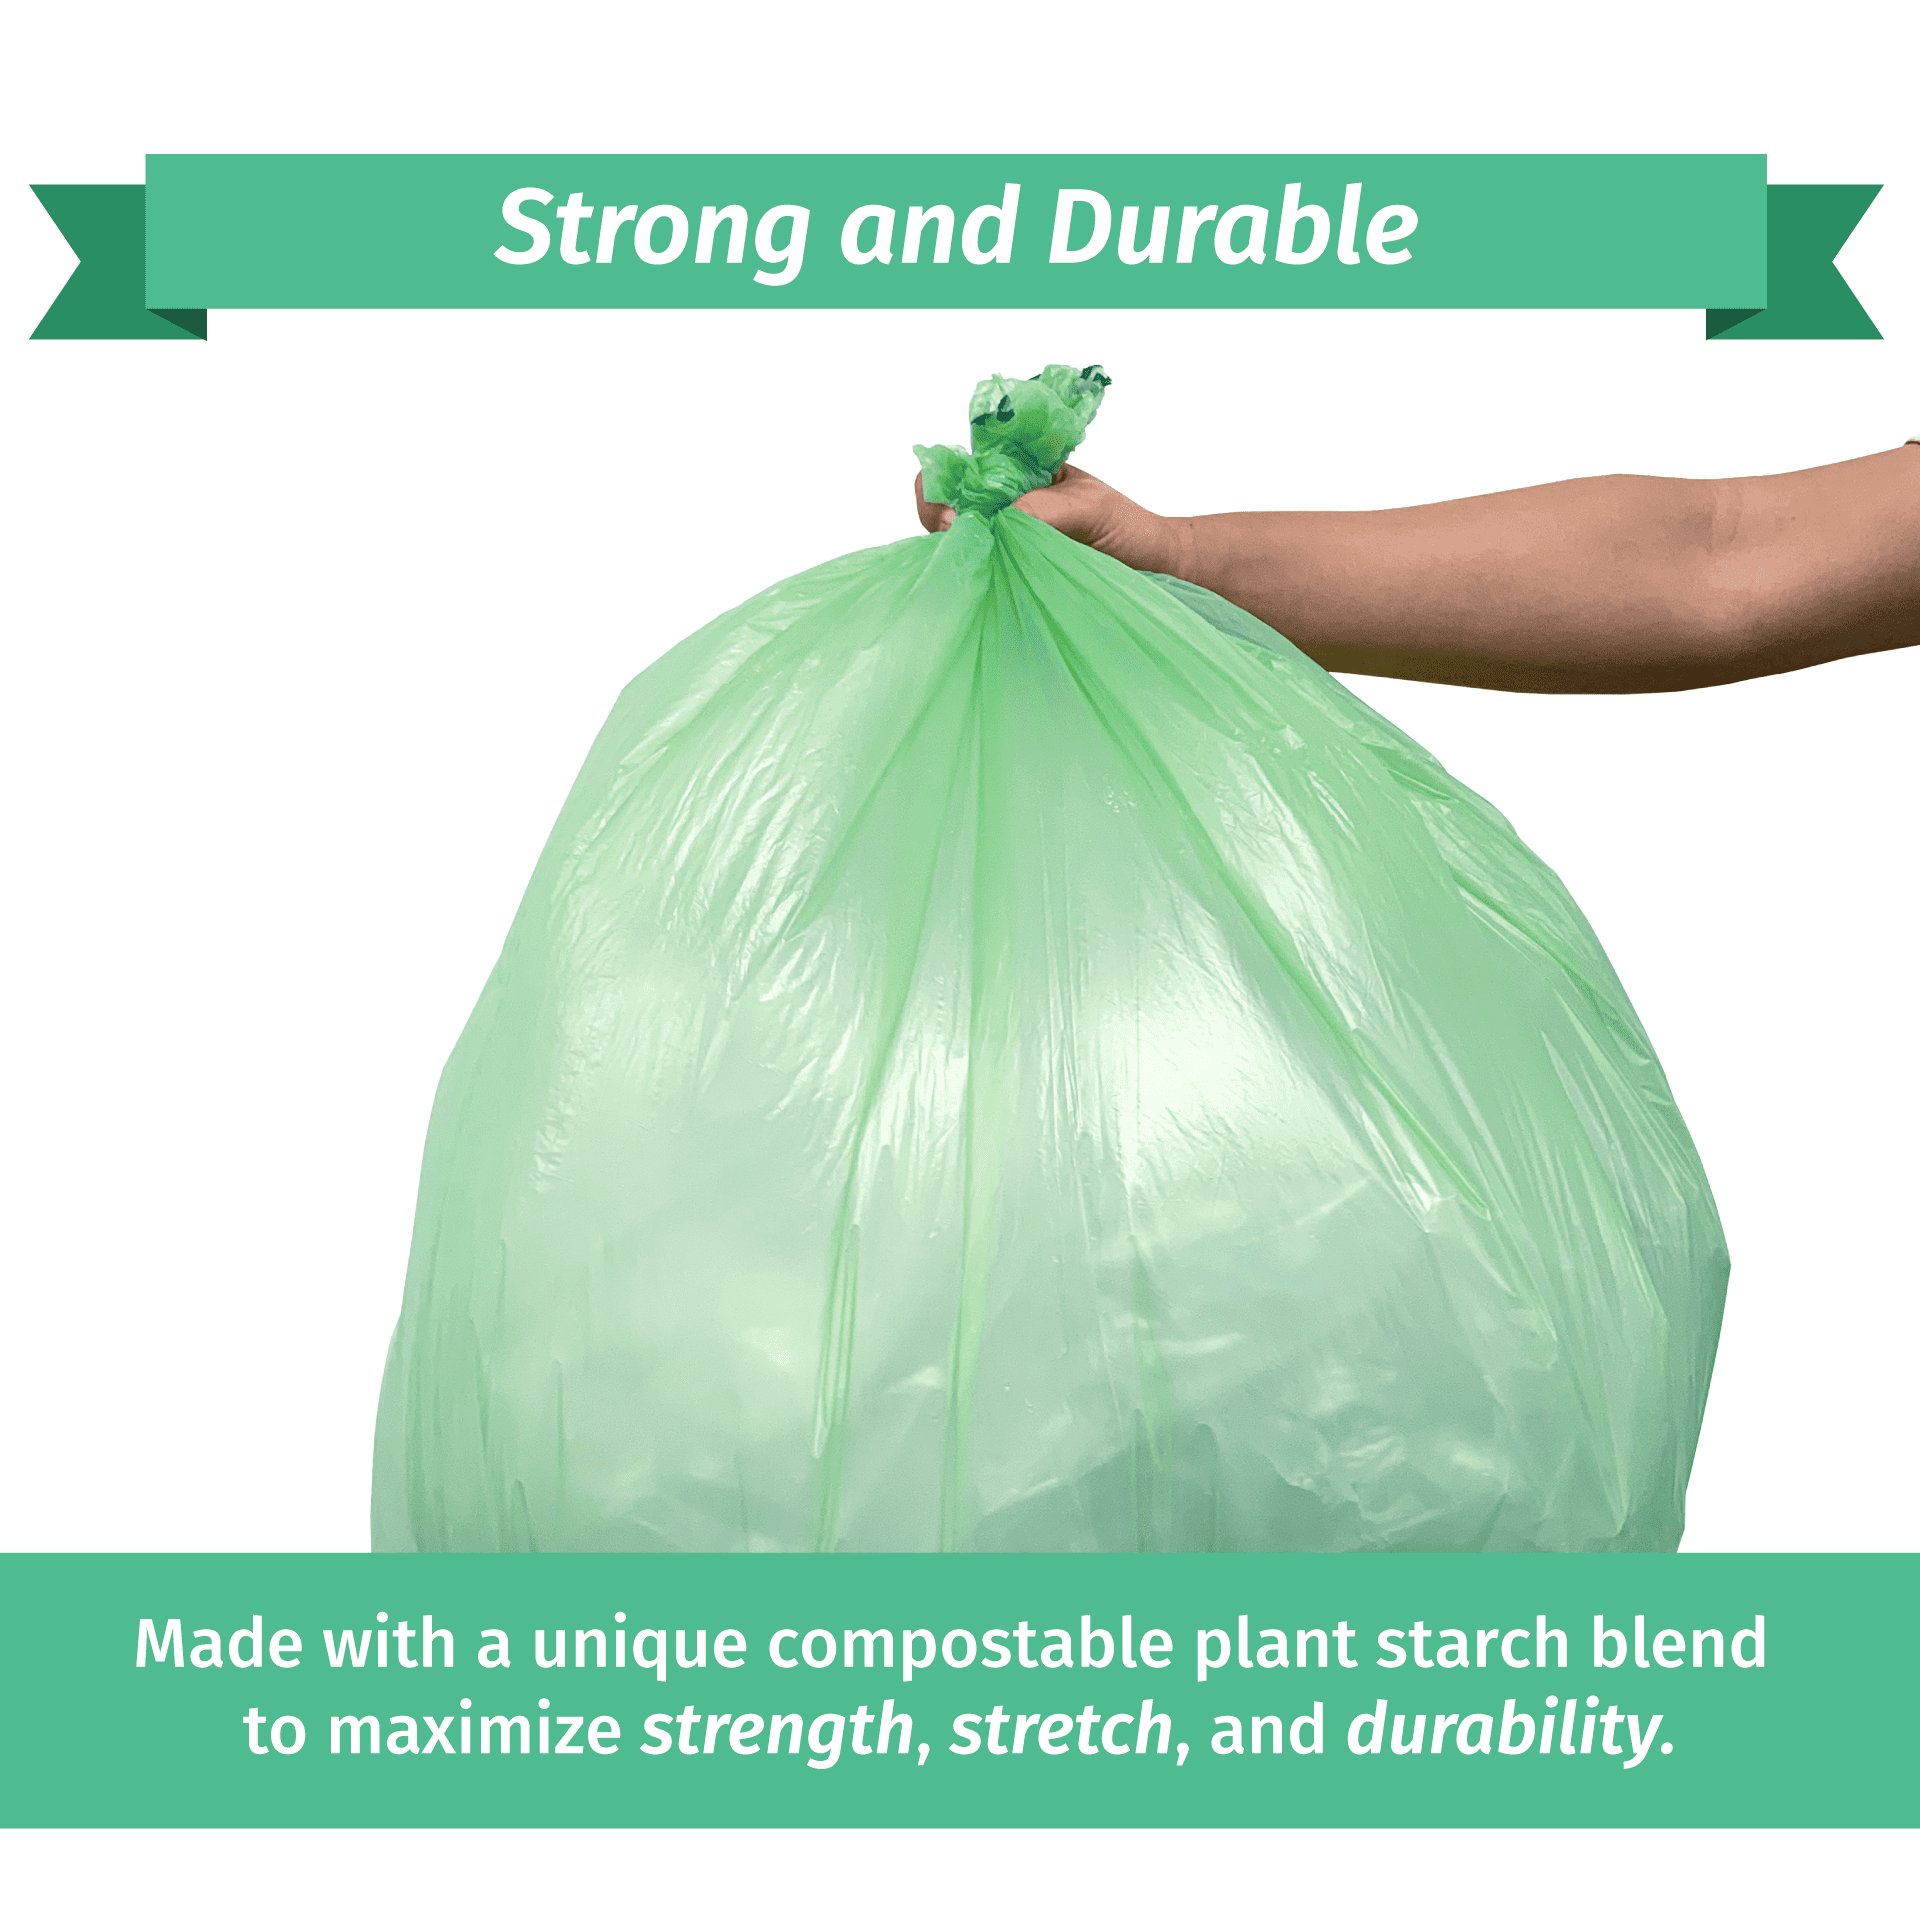 World Centric Compostable Trash Bags, 13 gal, 0.6 mil, 23 x 29, Green, 20 Bags/Roll, 10 Rolls/Carton